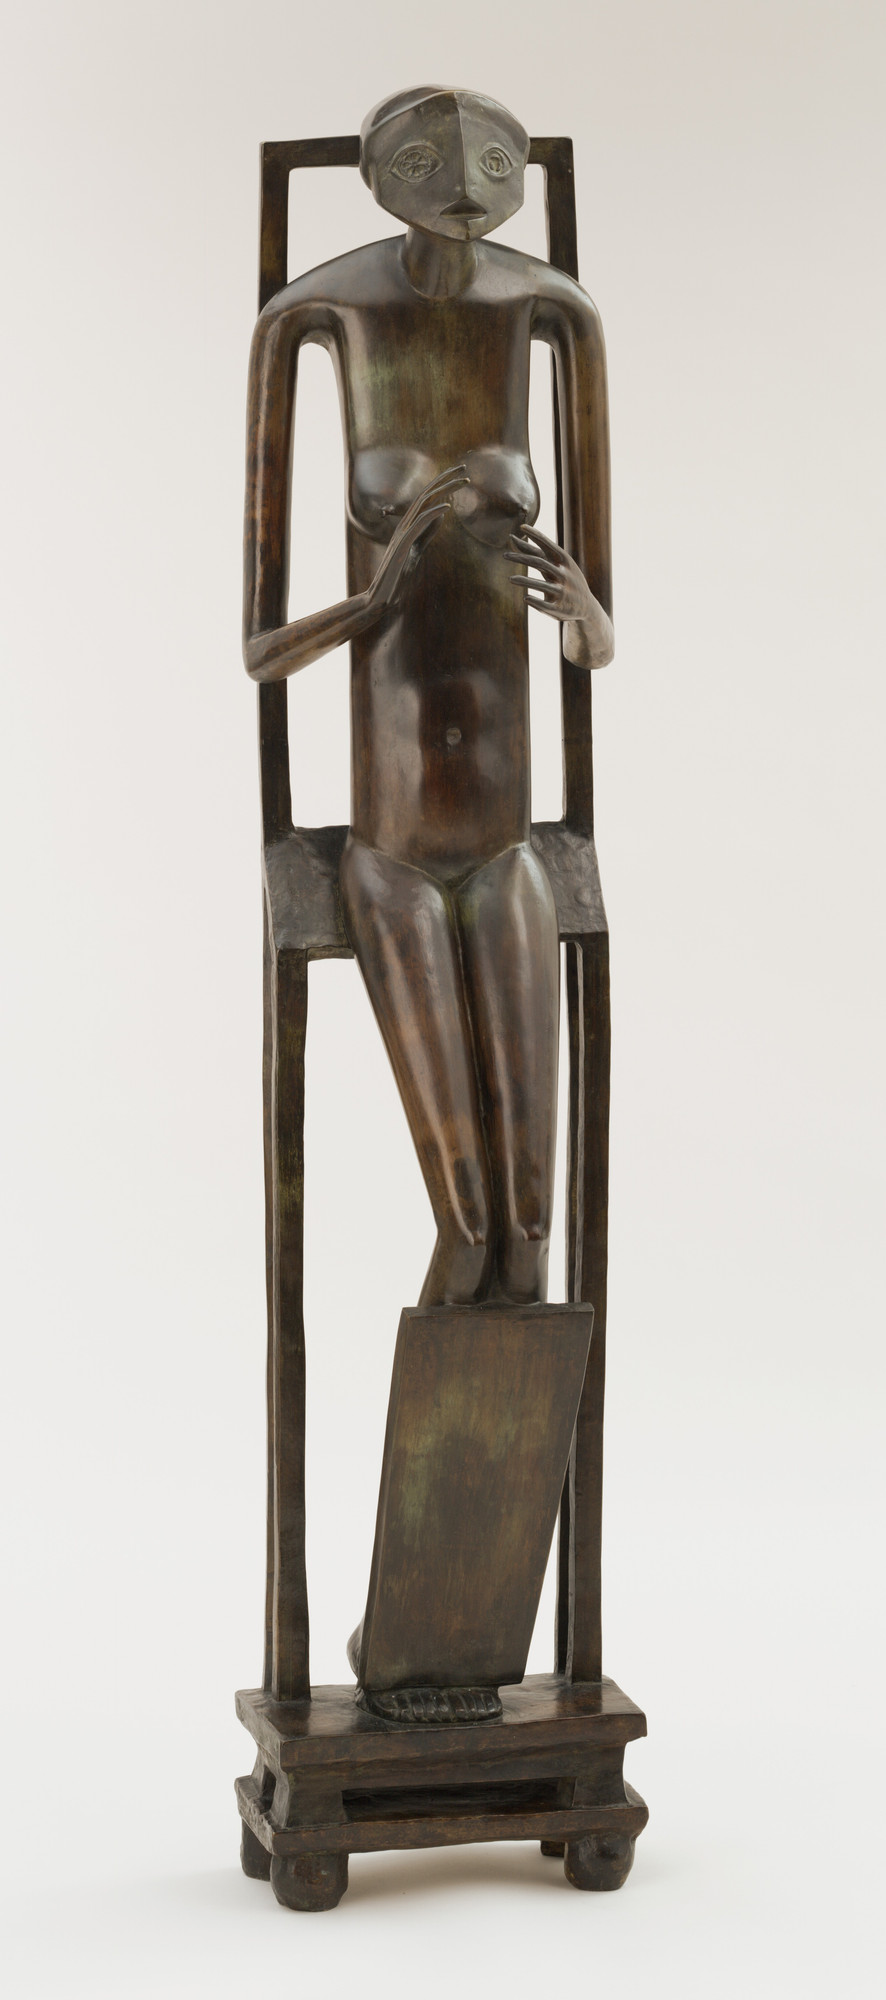 Alberto Giacometti, Hands Holding the Void (Invisible Object), 1934 (cast c. 1954–55), bronze, 152.1 x 32.6 x 25.3 cm (The Museum of Modern Art)